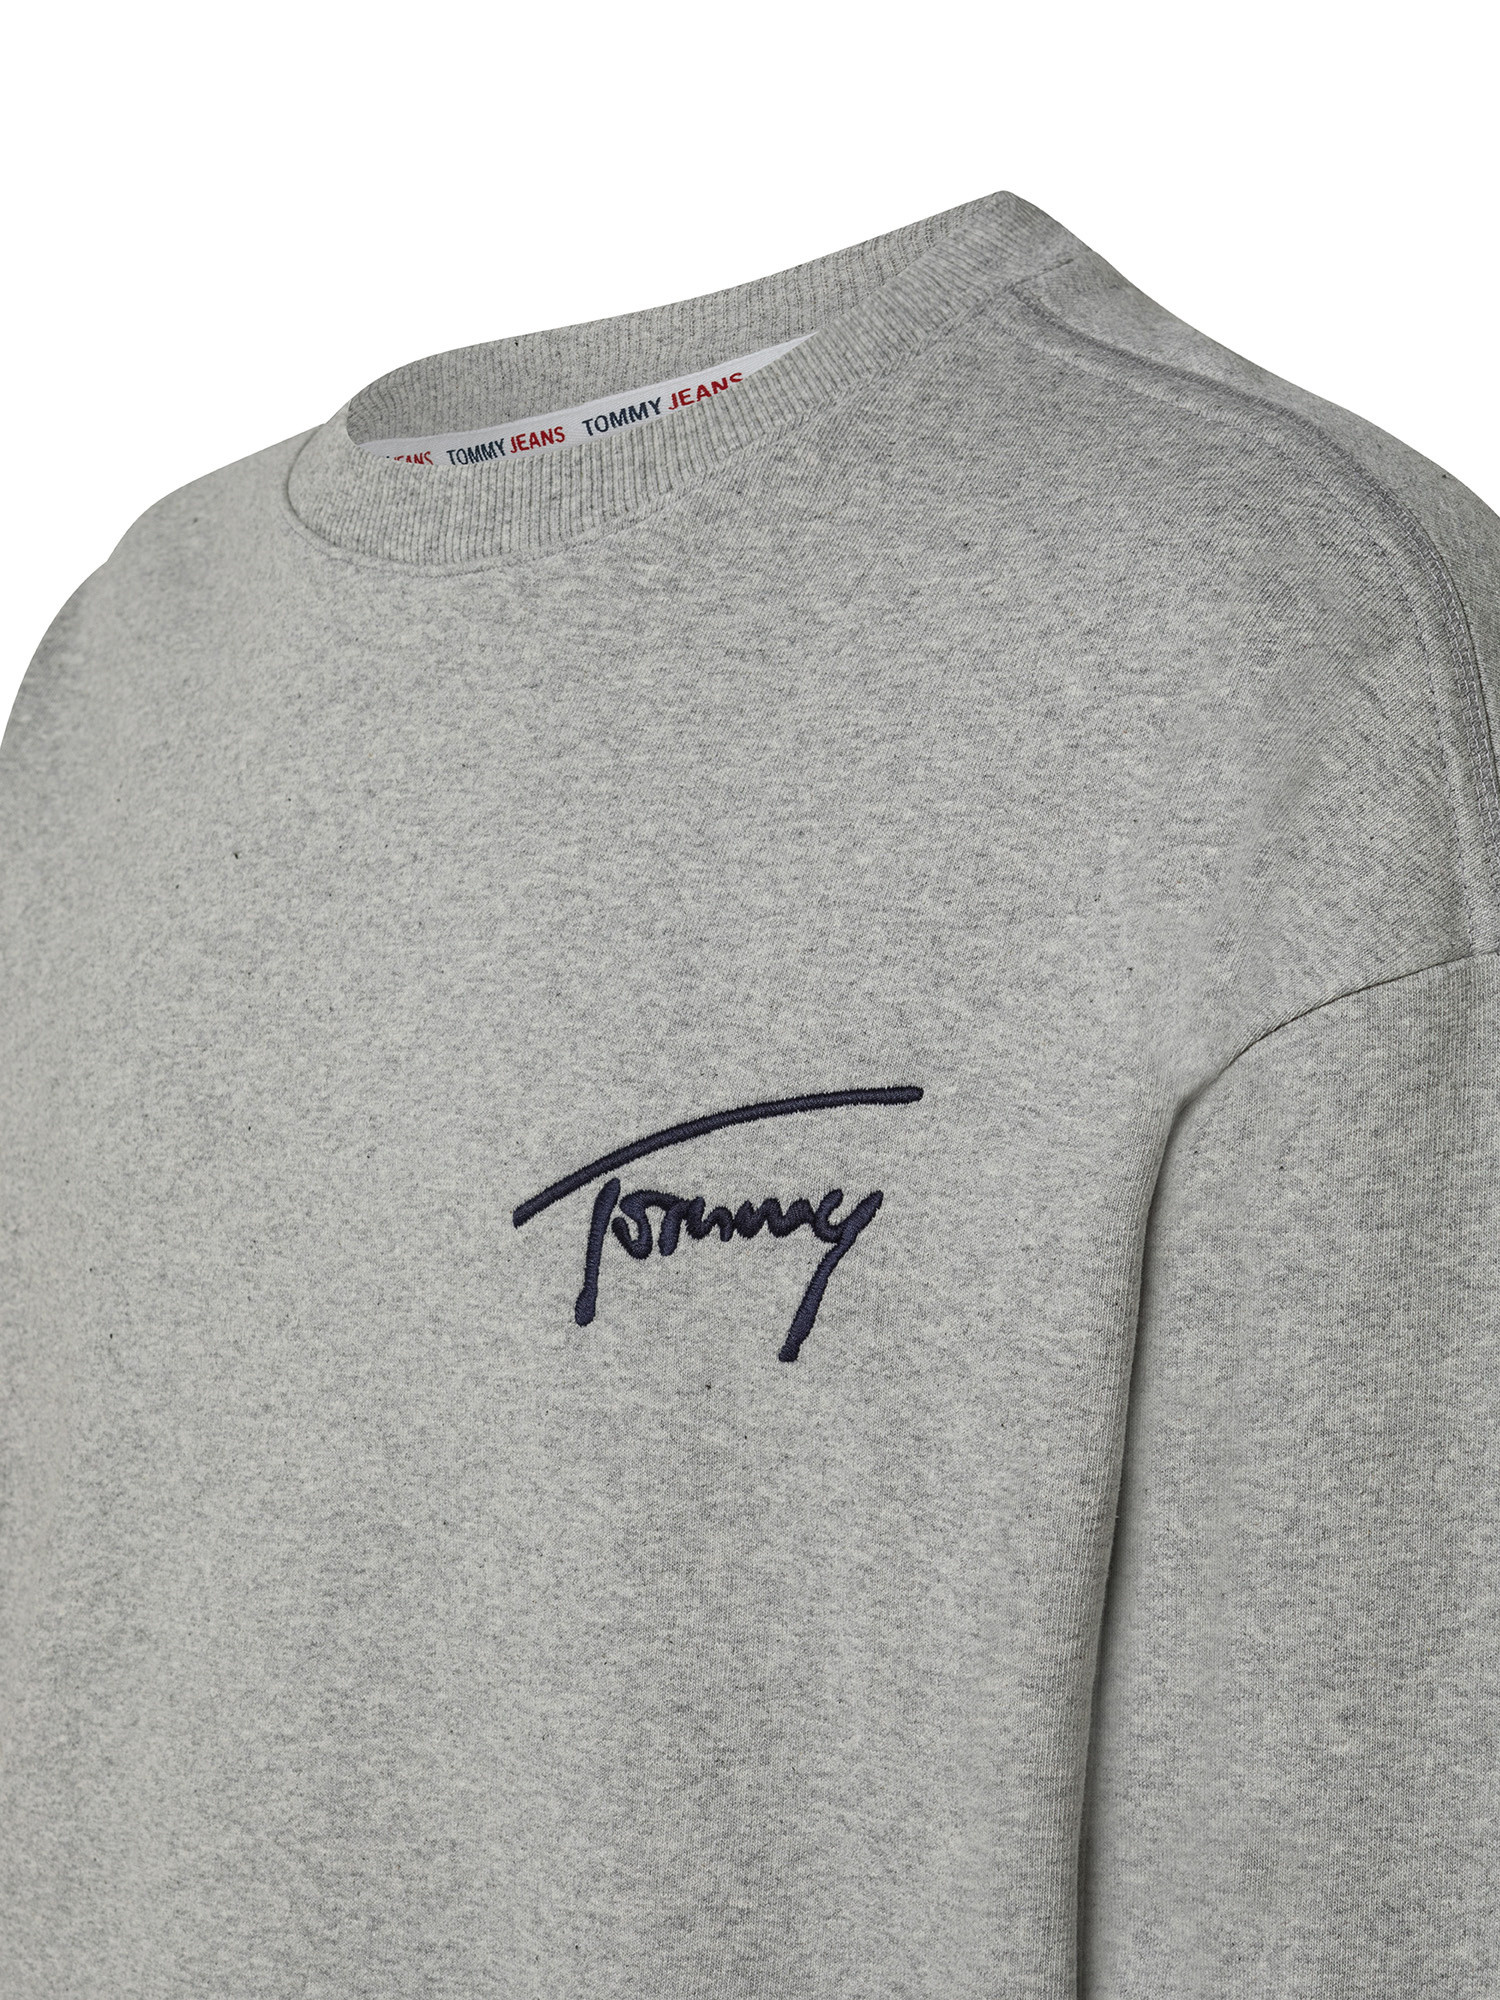 Tommy Jeans - Sweatshirt with signature logo, Grey, large image number 2